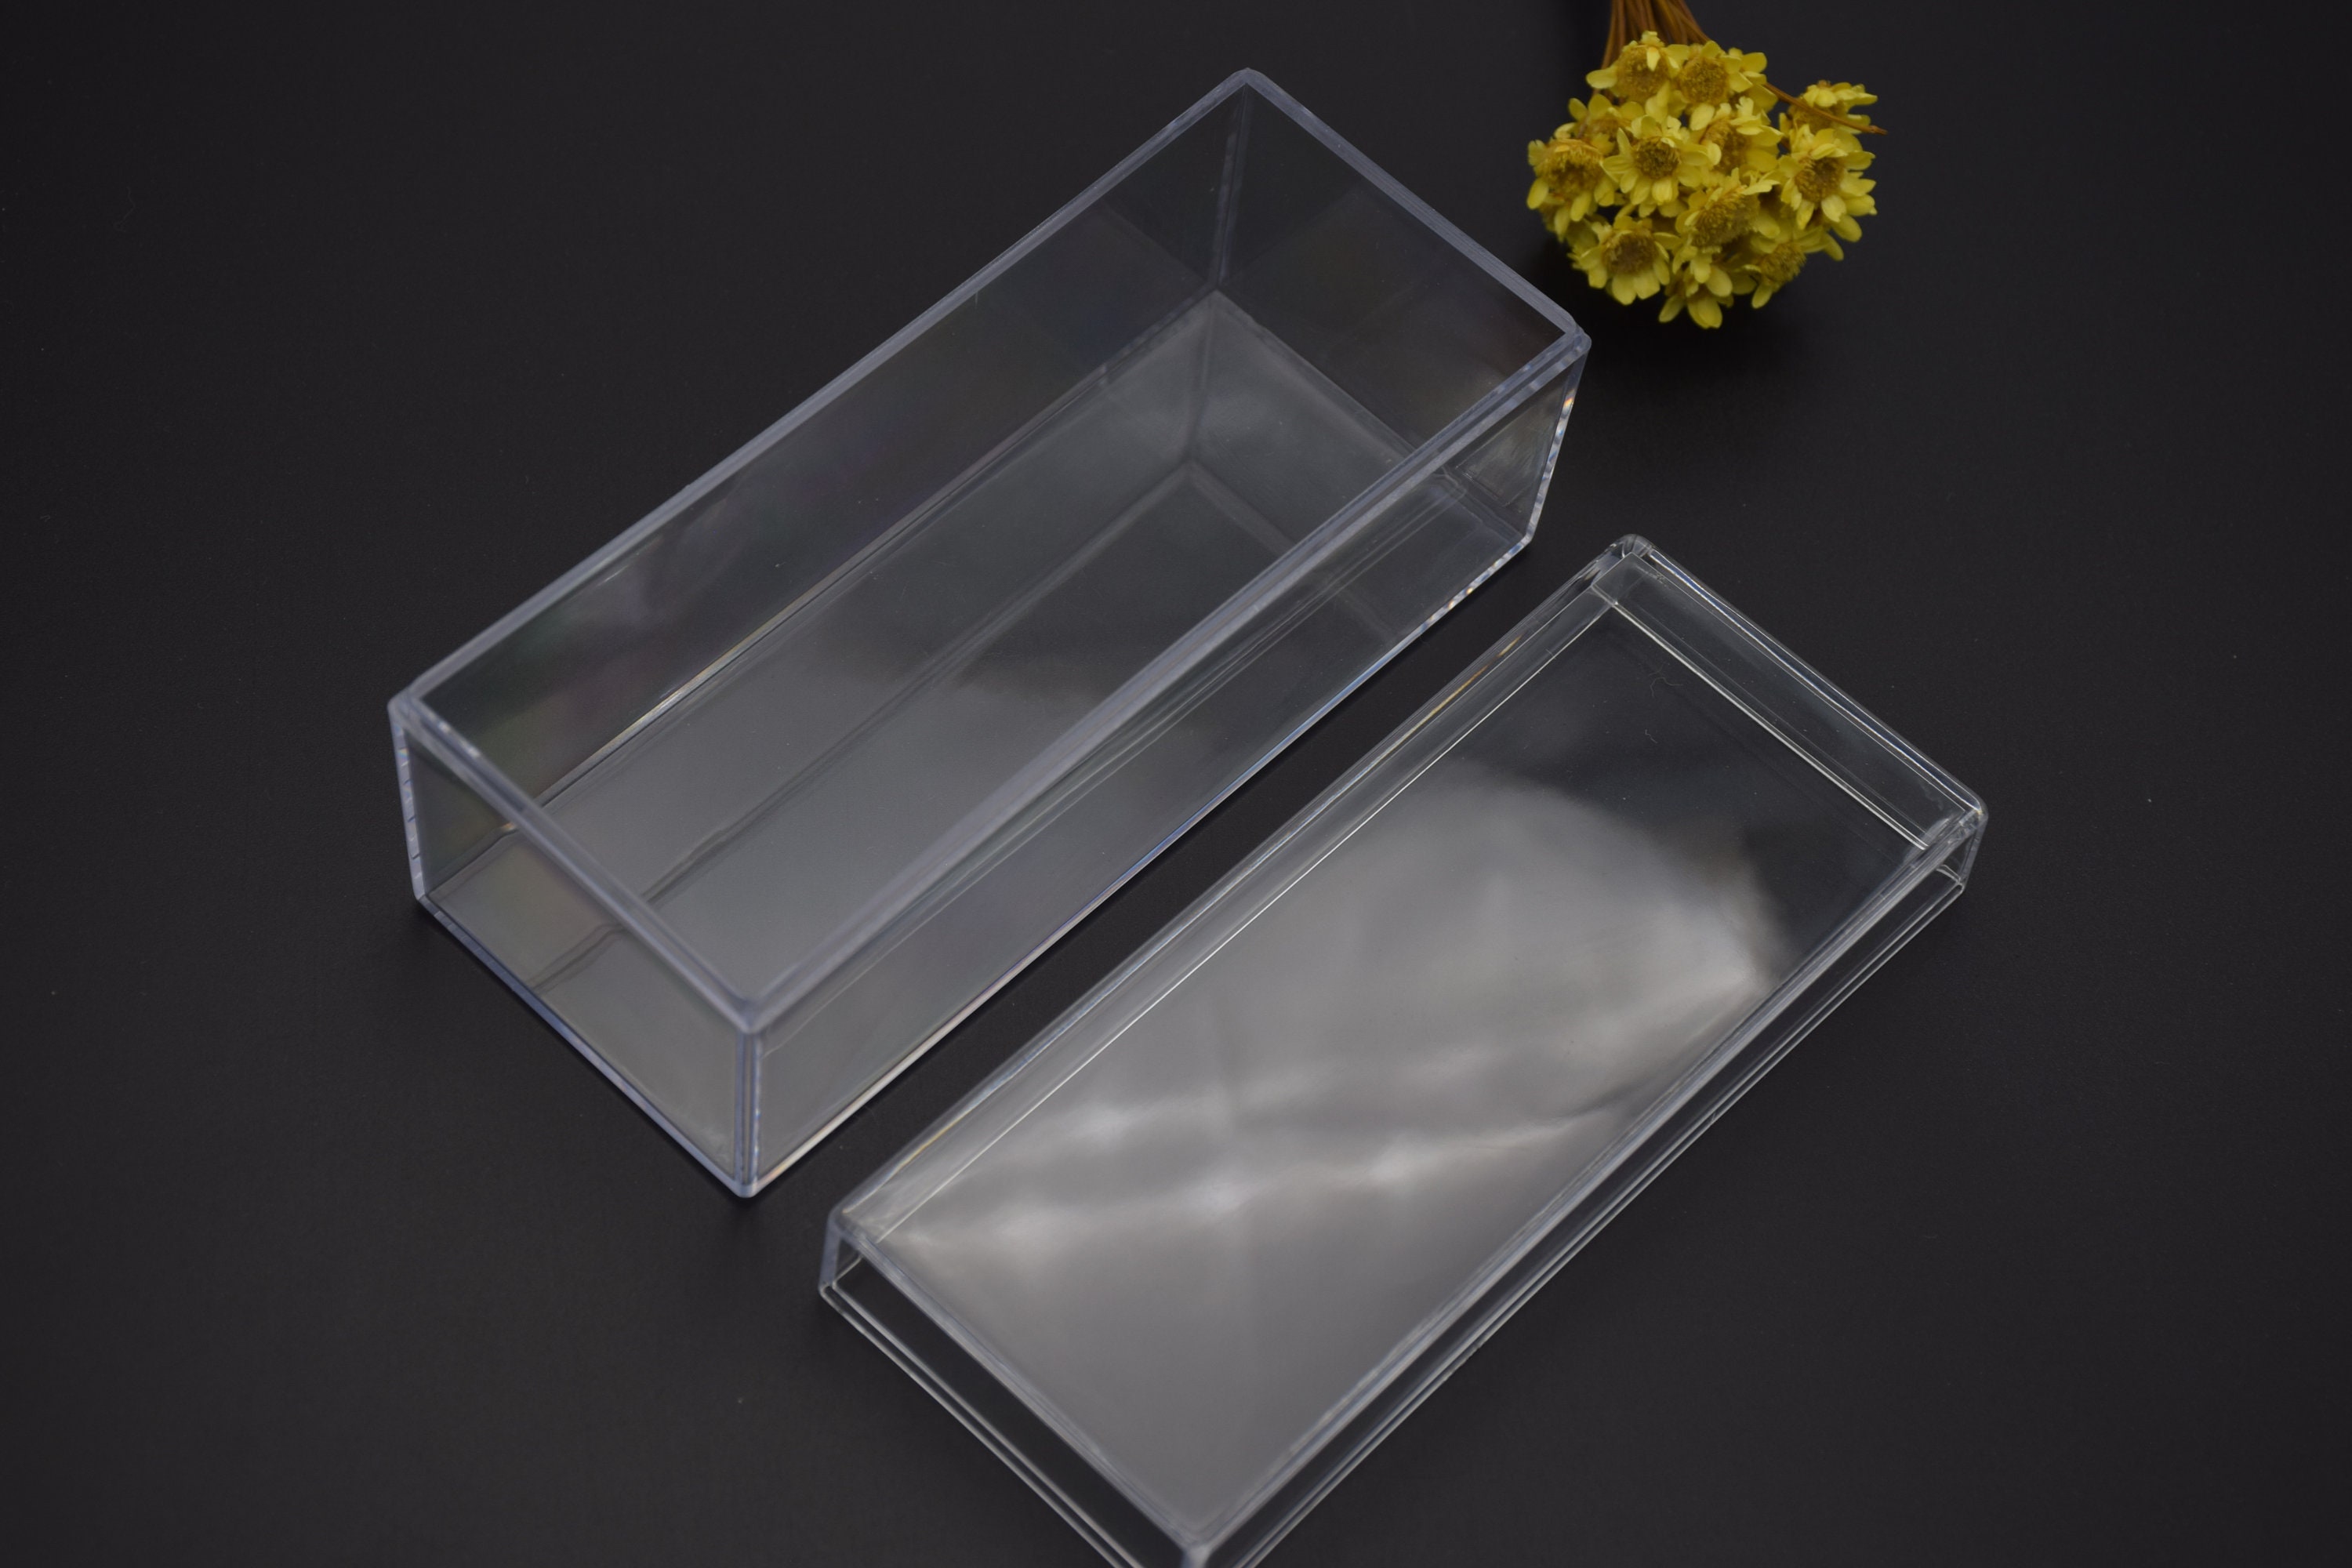 Pack of 10 Clear Acrylic Favor Box Wedding Party Favor Boxes Containers  Plastic Small